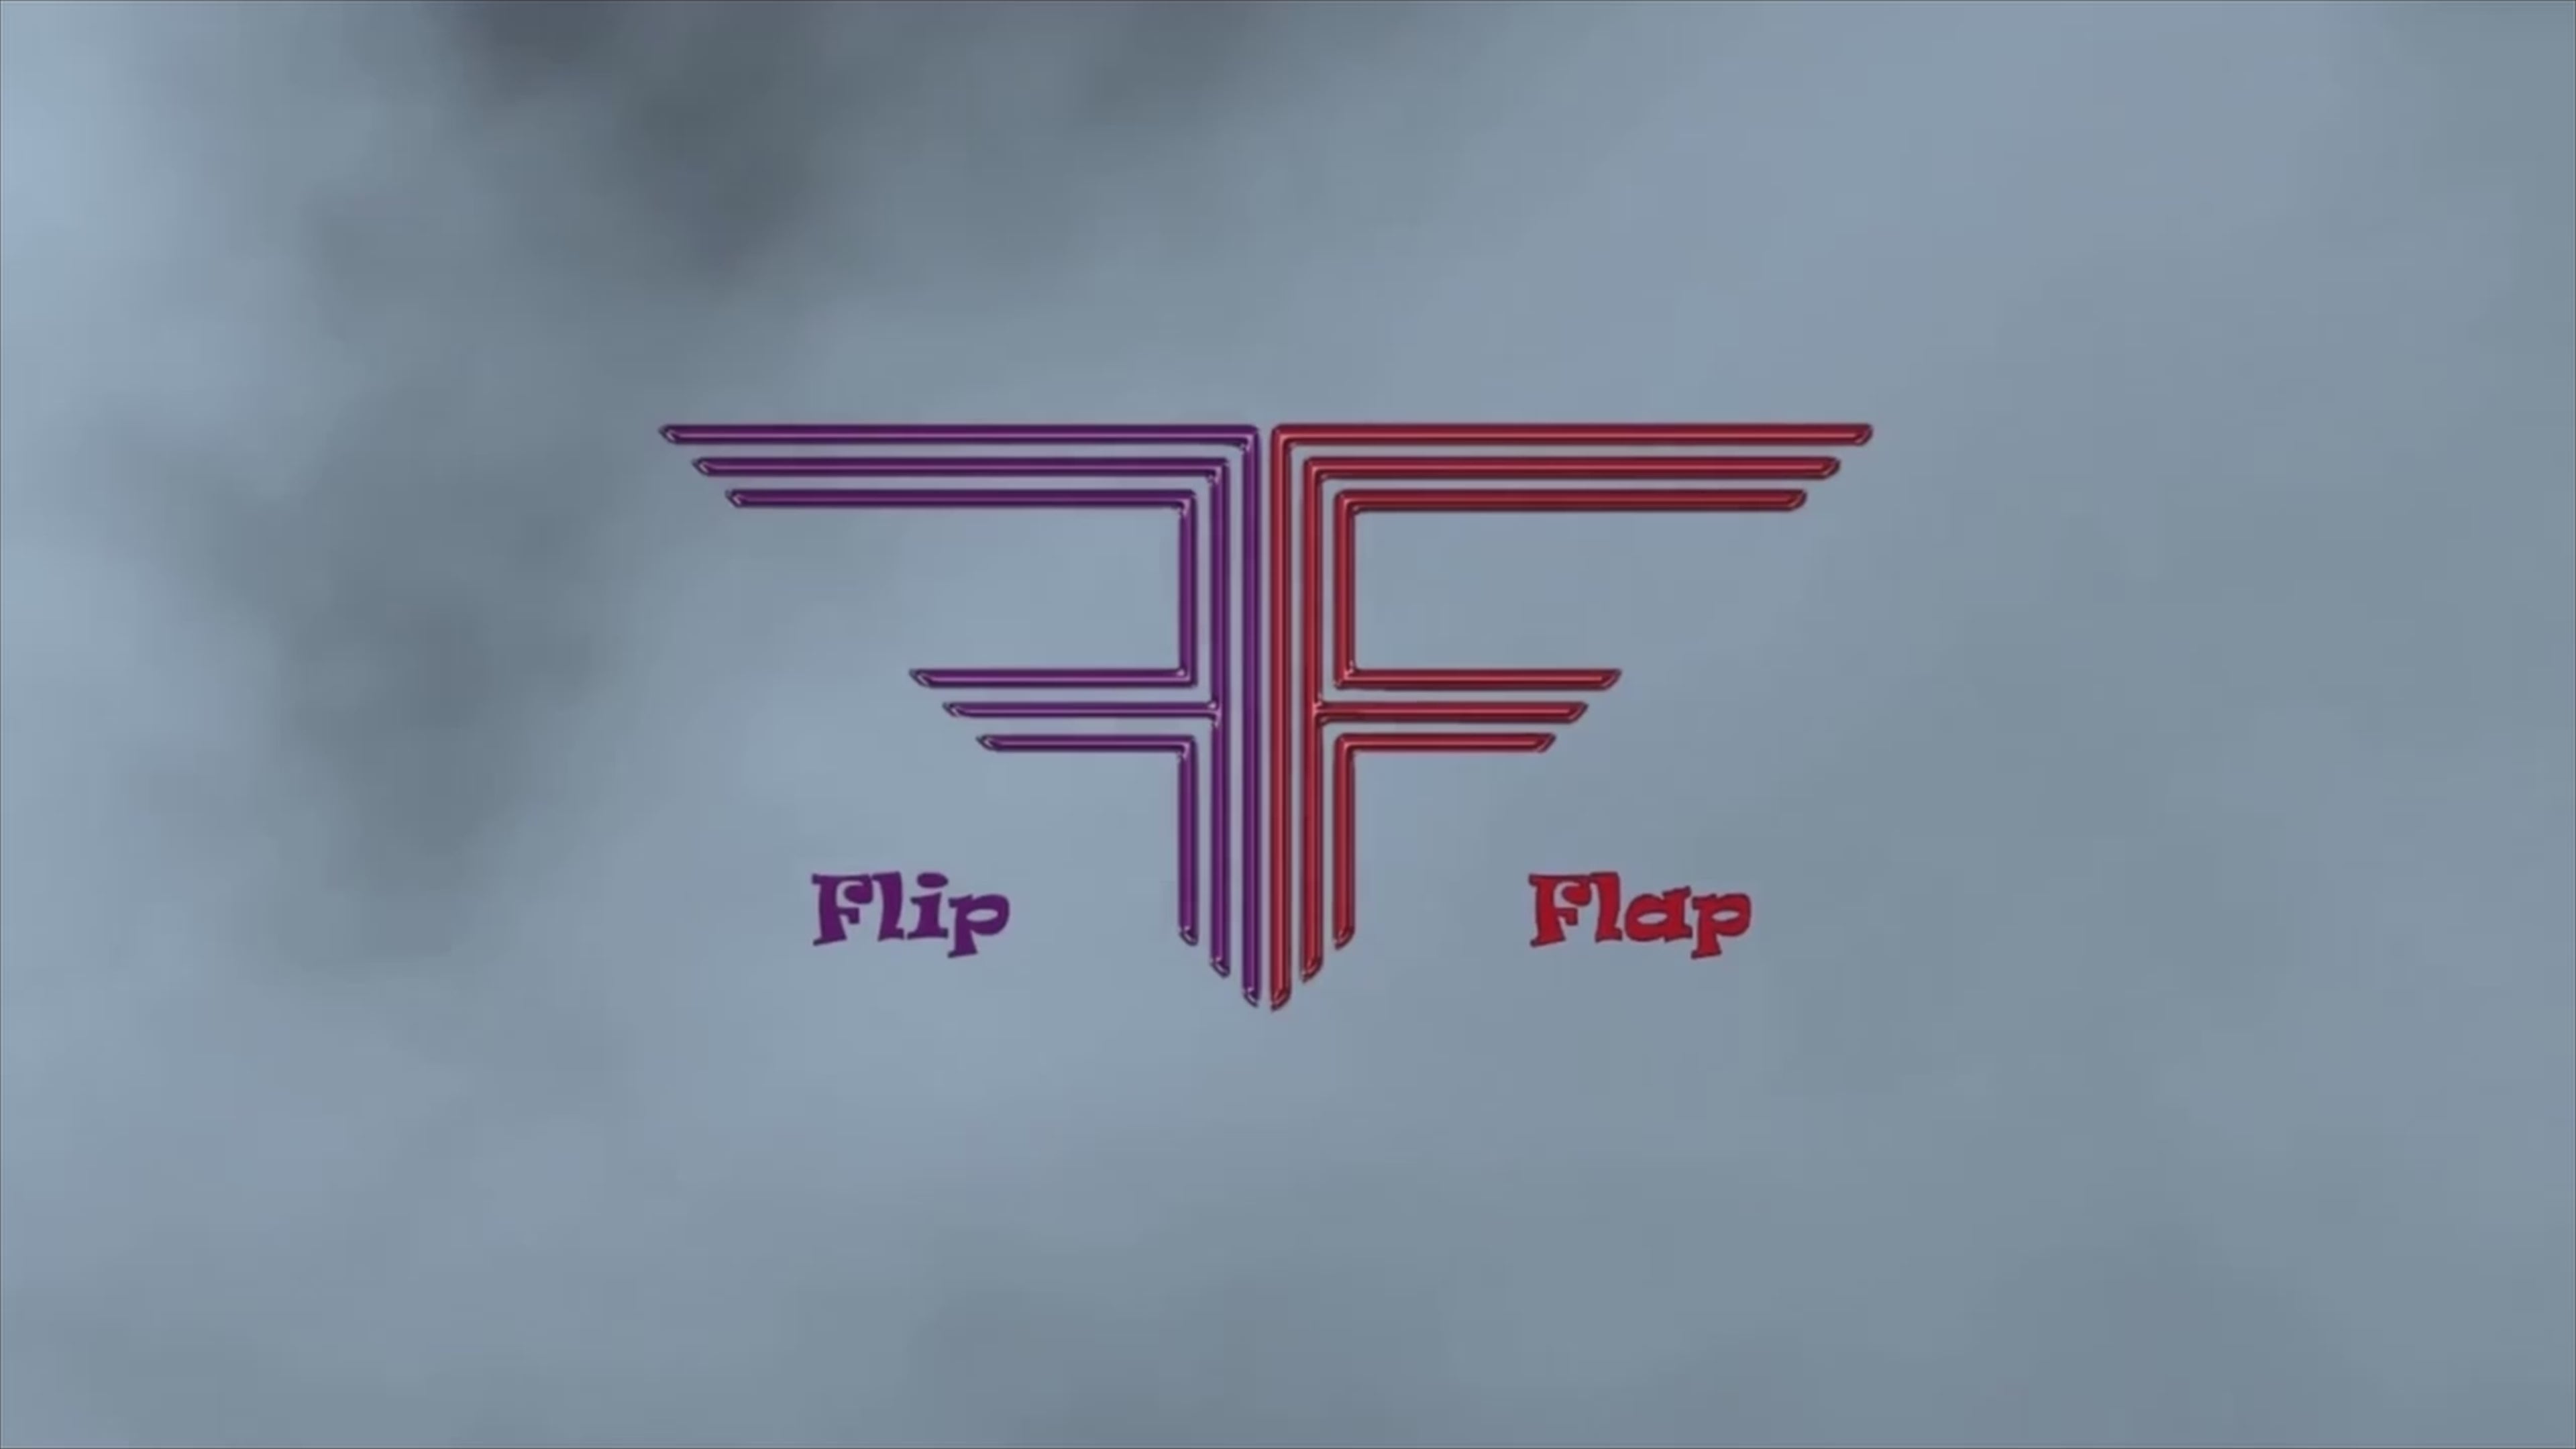 Load video: Flip Flap rotating with her uses in flashing text.